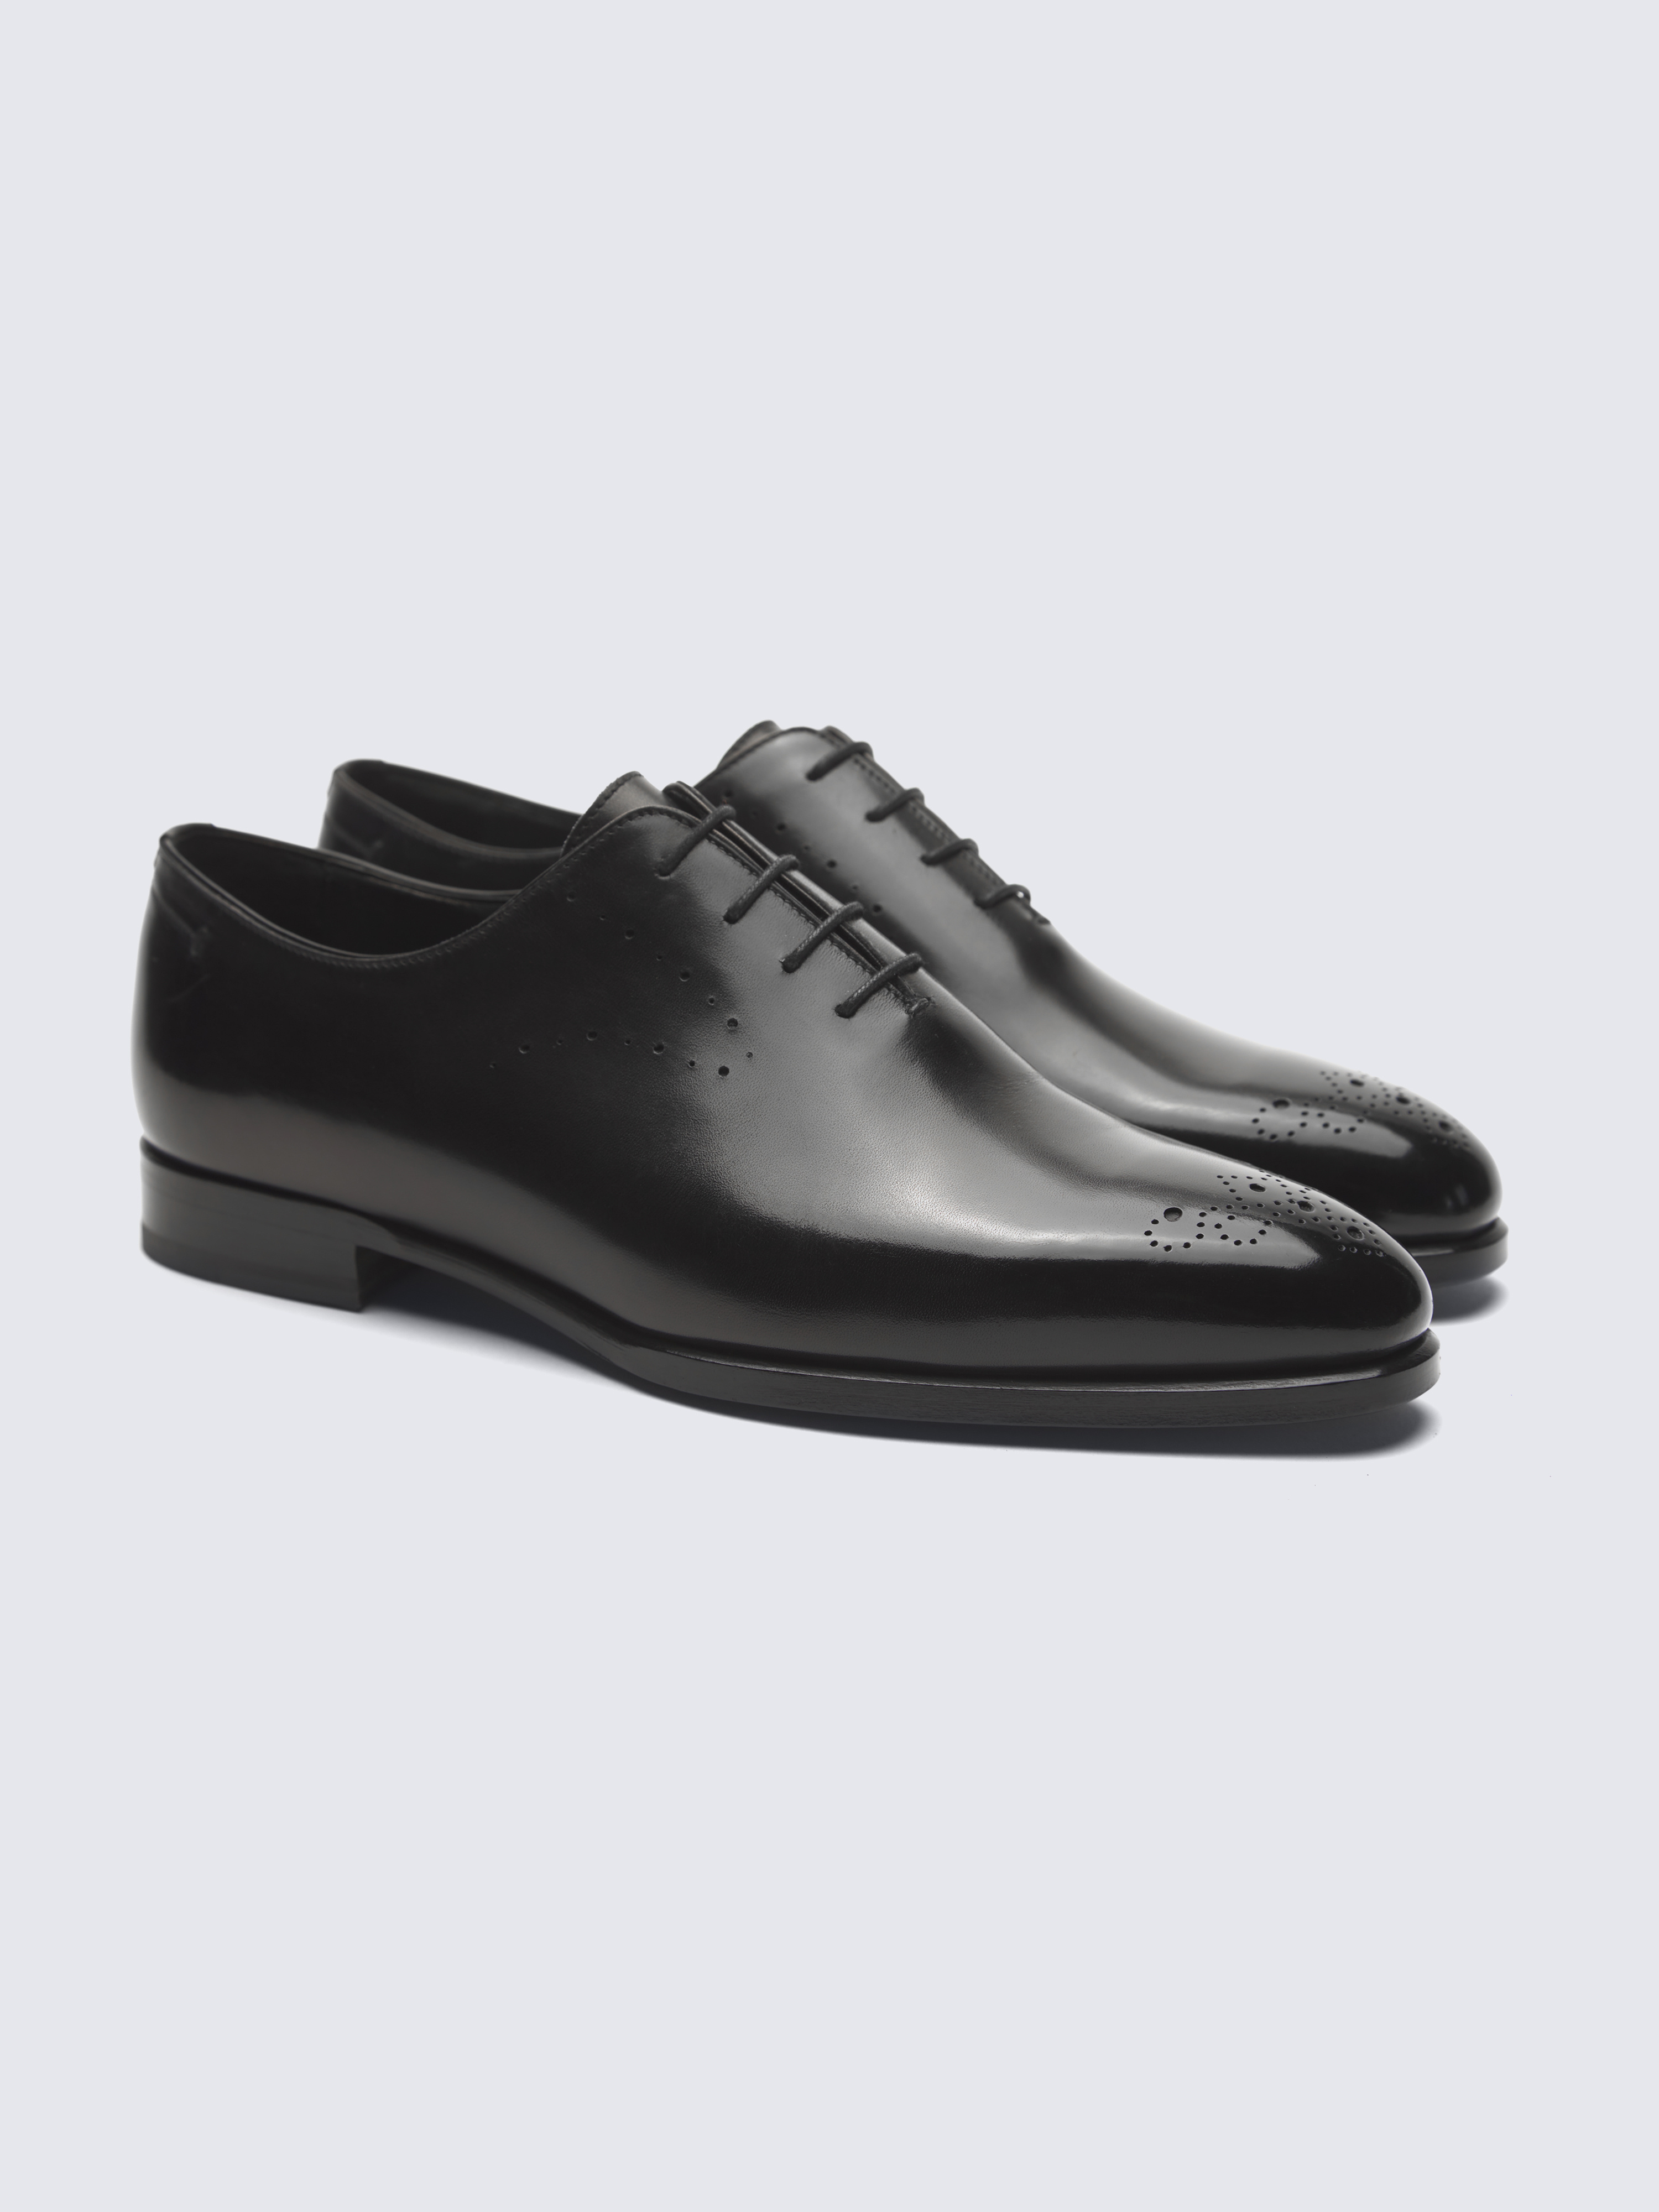 Black calf leather oxford shoes